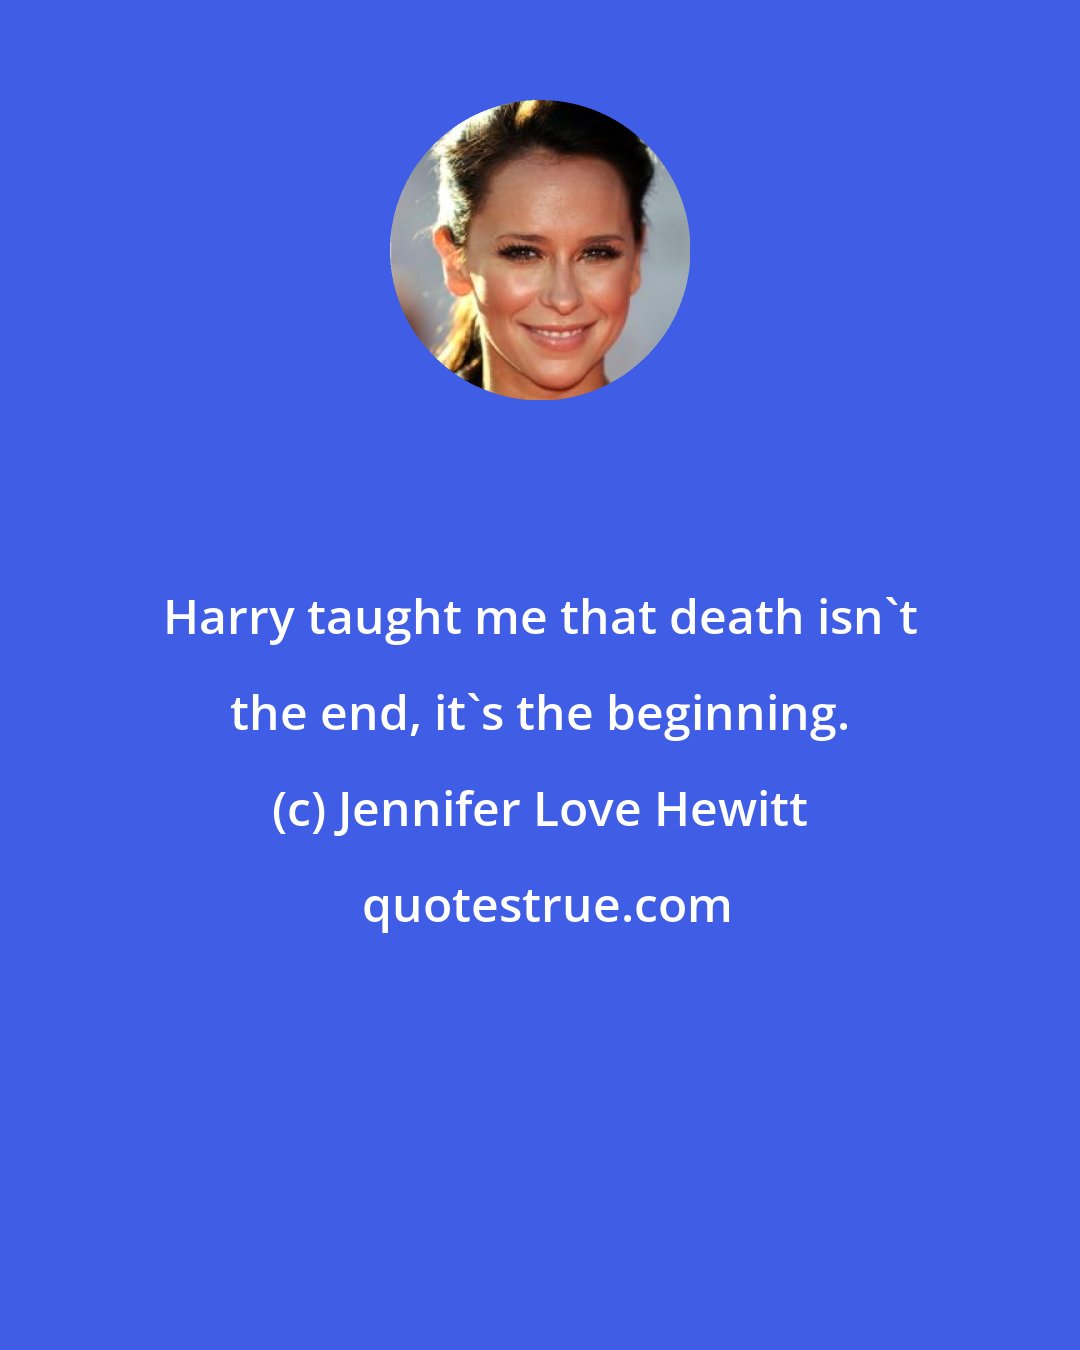 Jennifer Love Hewitt: Harry taught me that death isn't the end, it's the beginning.